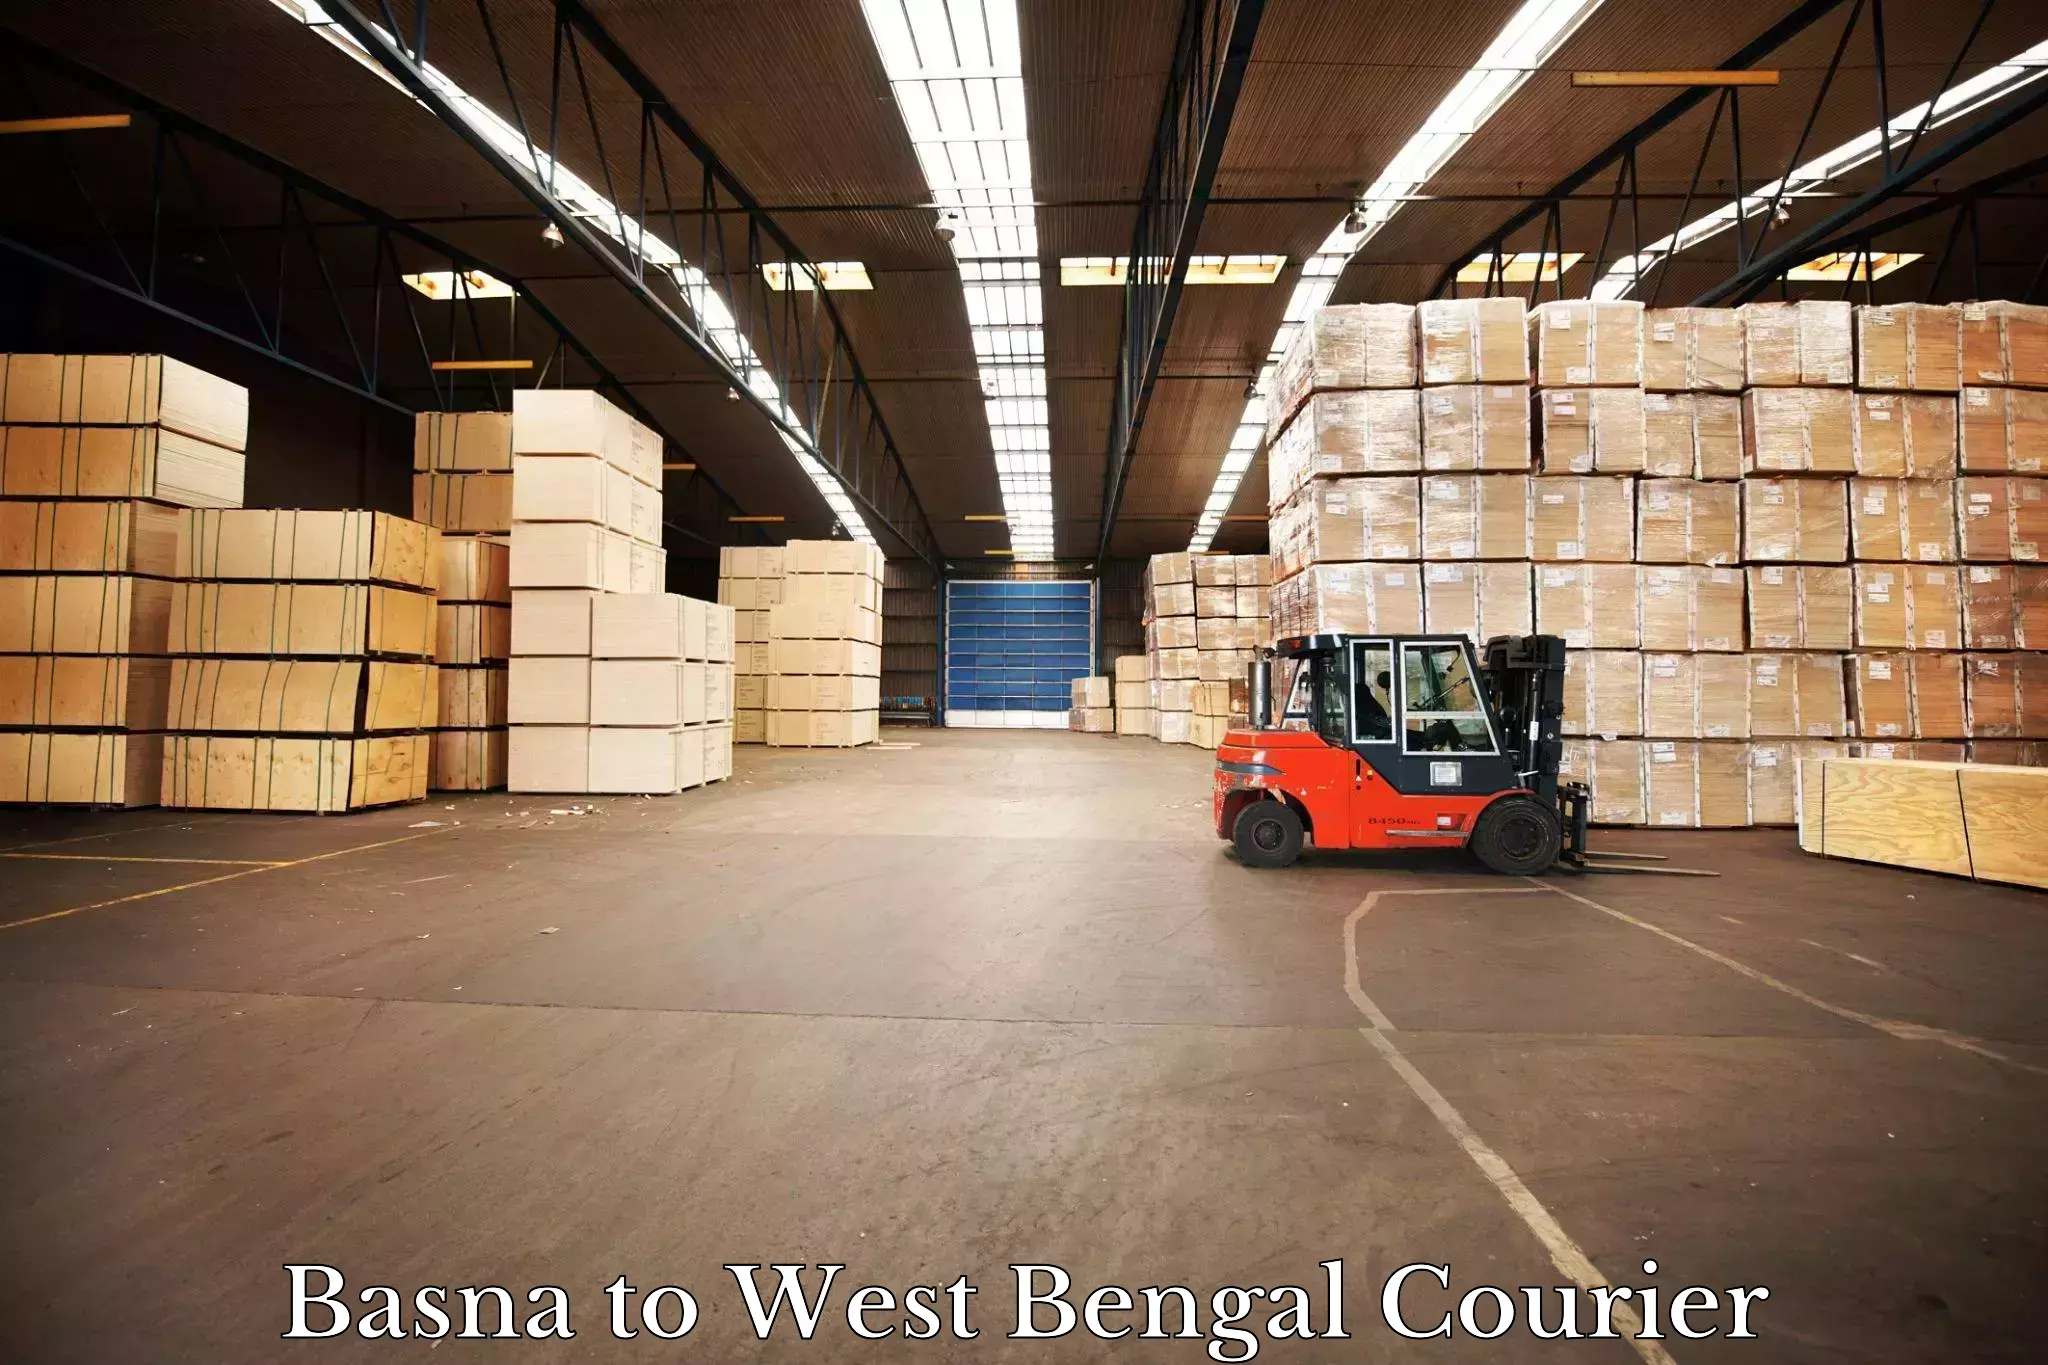 Expedited shipping methods Basna to West Bengal